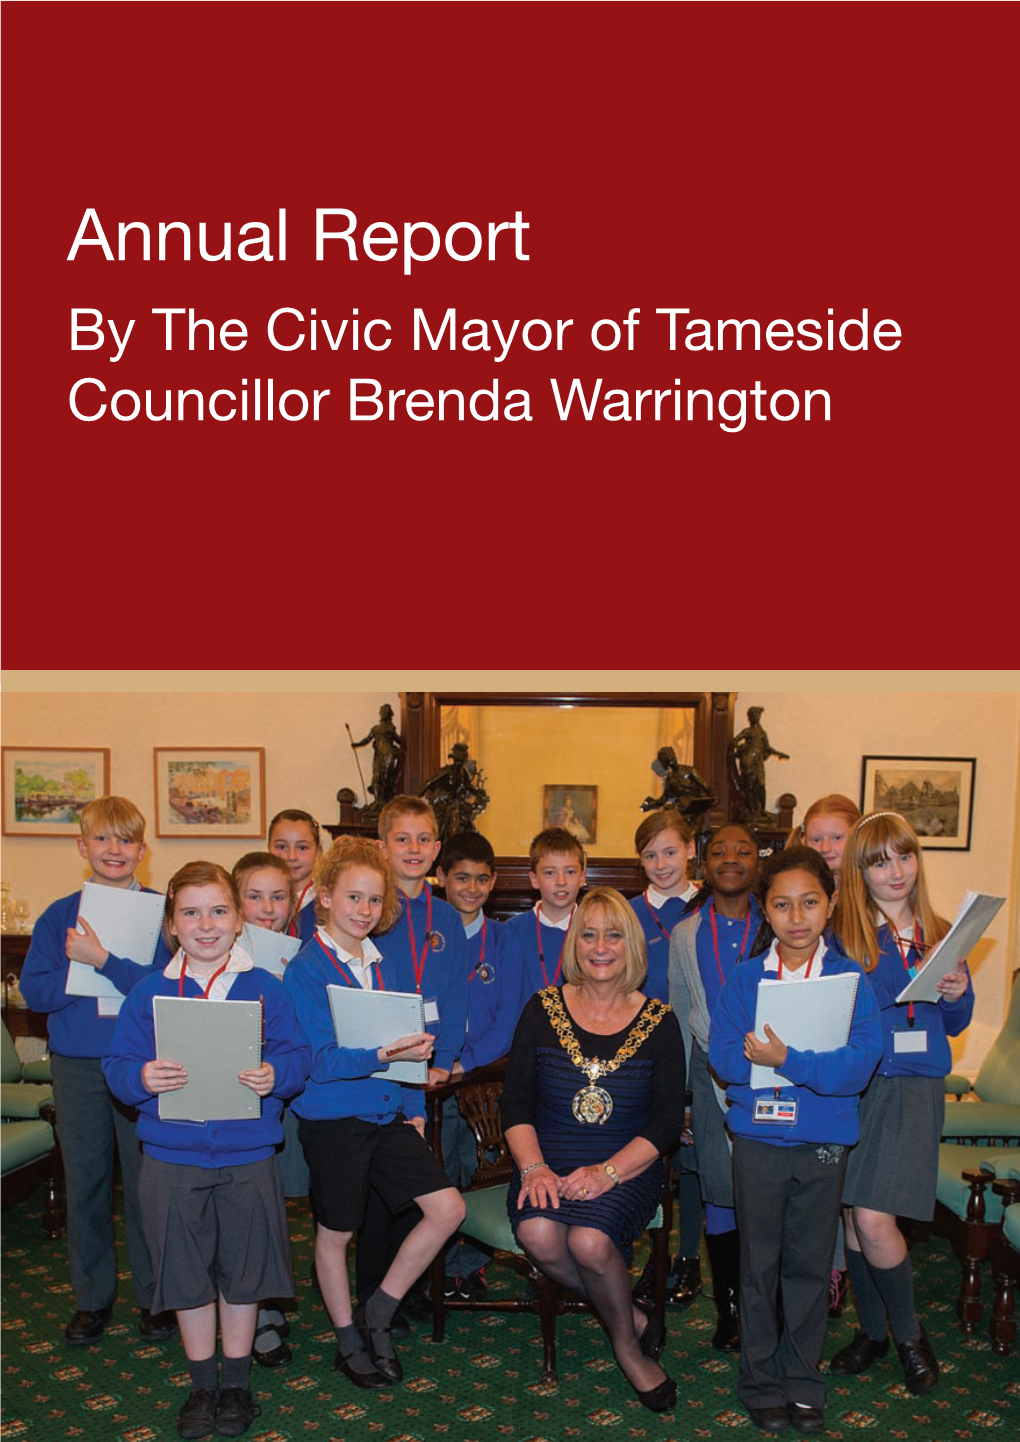 Annual Report by the Civic Mayor of Tameside Councillor Brenda